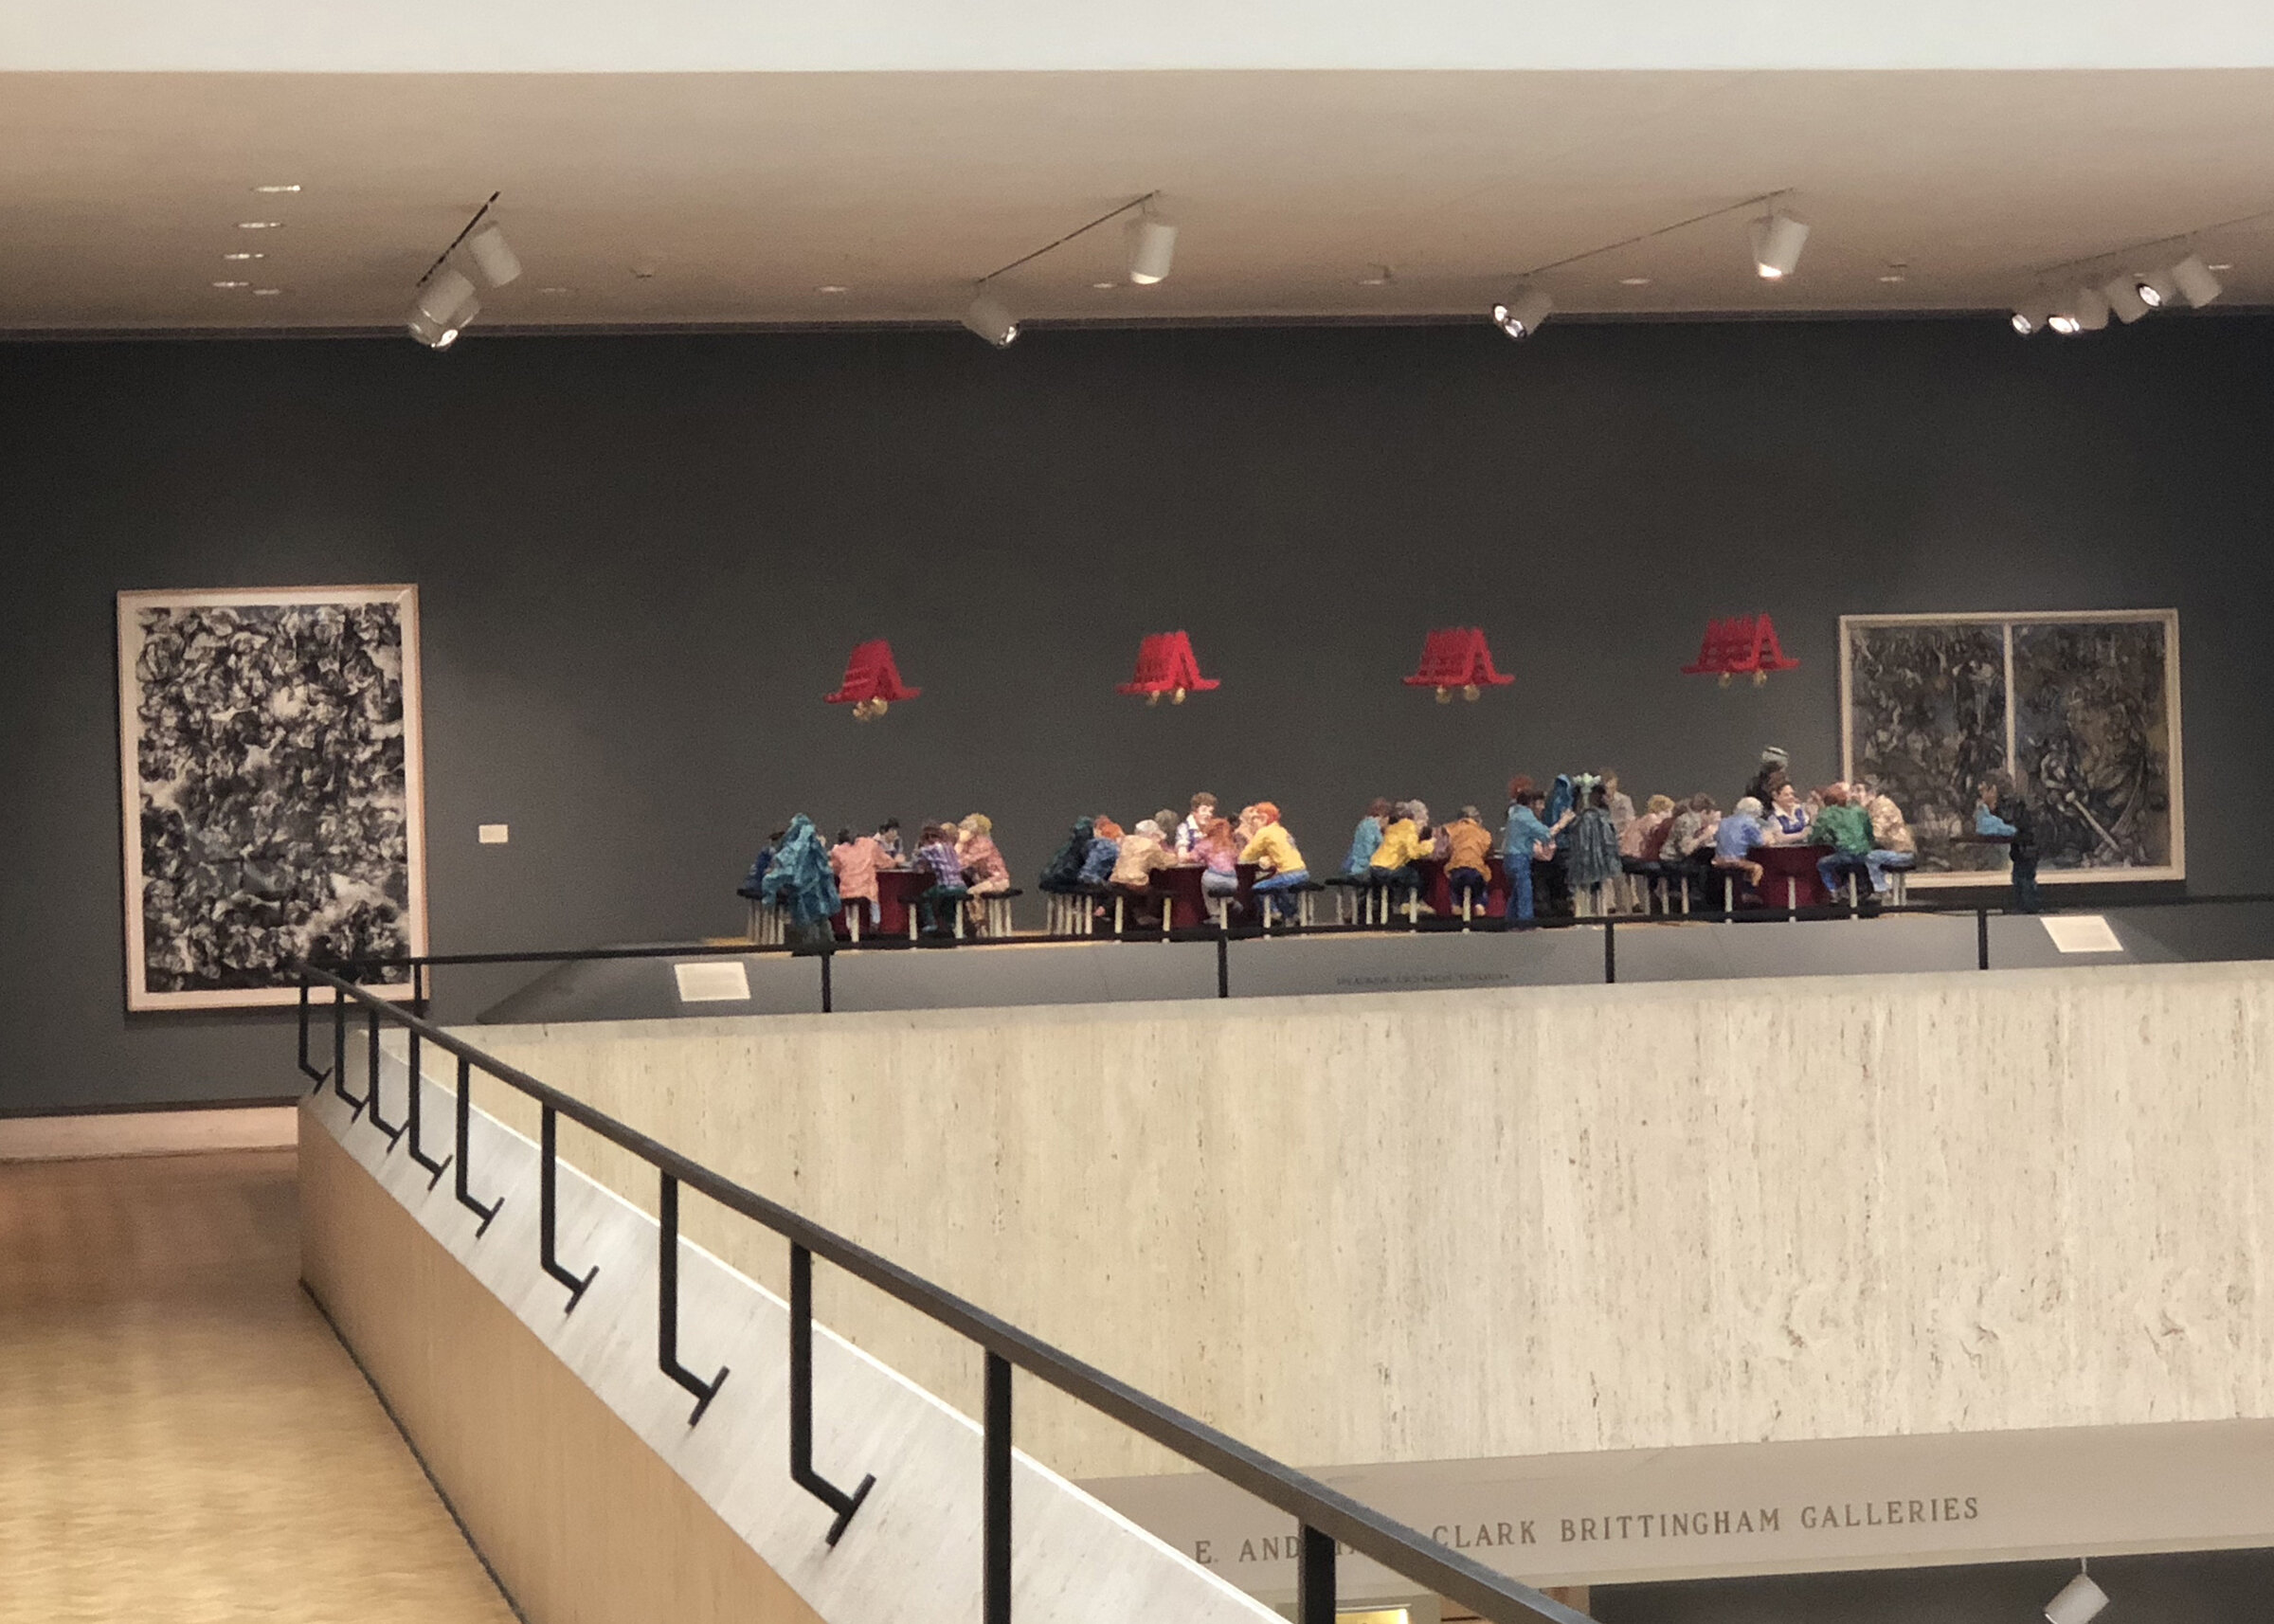 Chazen Museum at University of Wisconsin, Madison (Public Collection)